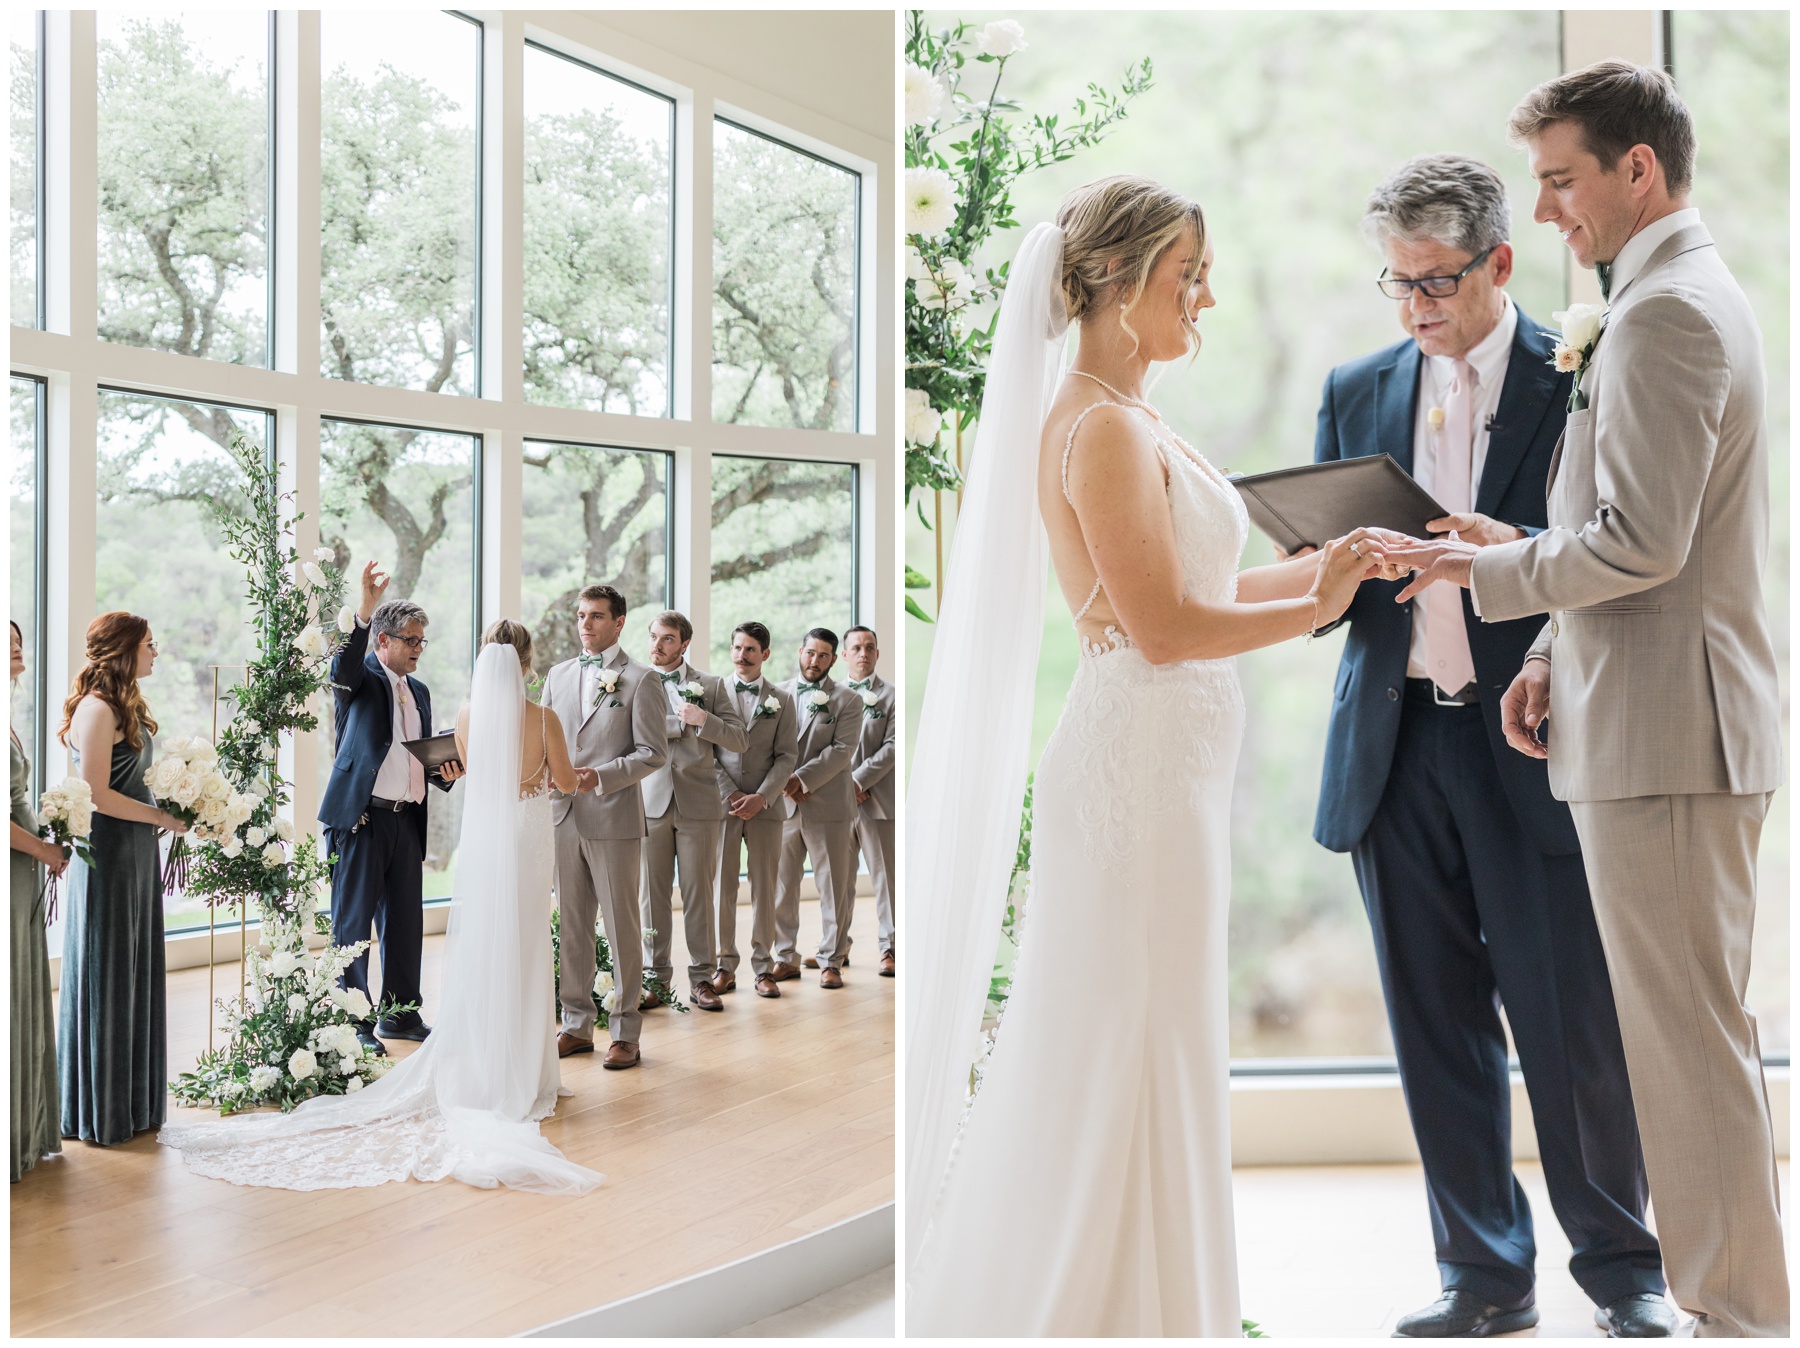 Wedding ceremony in the Chapel at The Preserve at Canyon Lake